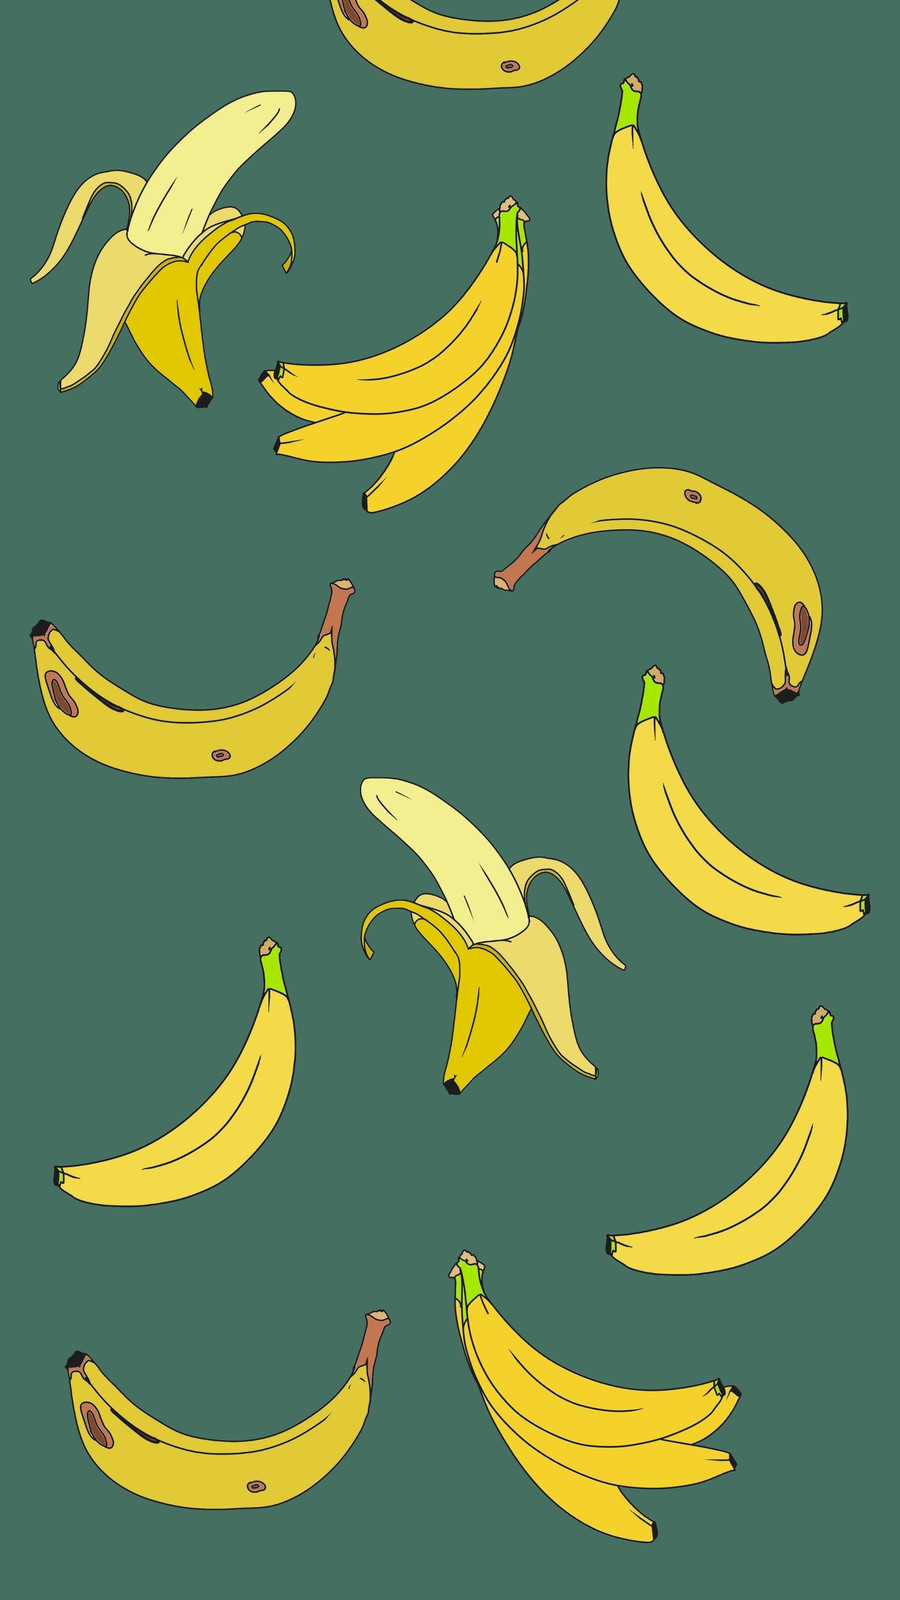 27 Banana Pictures  Download Free Images on Unsplash